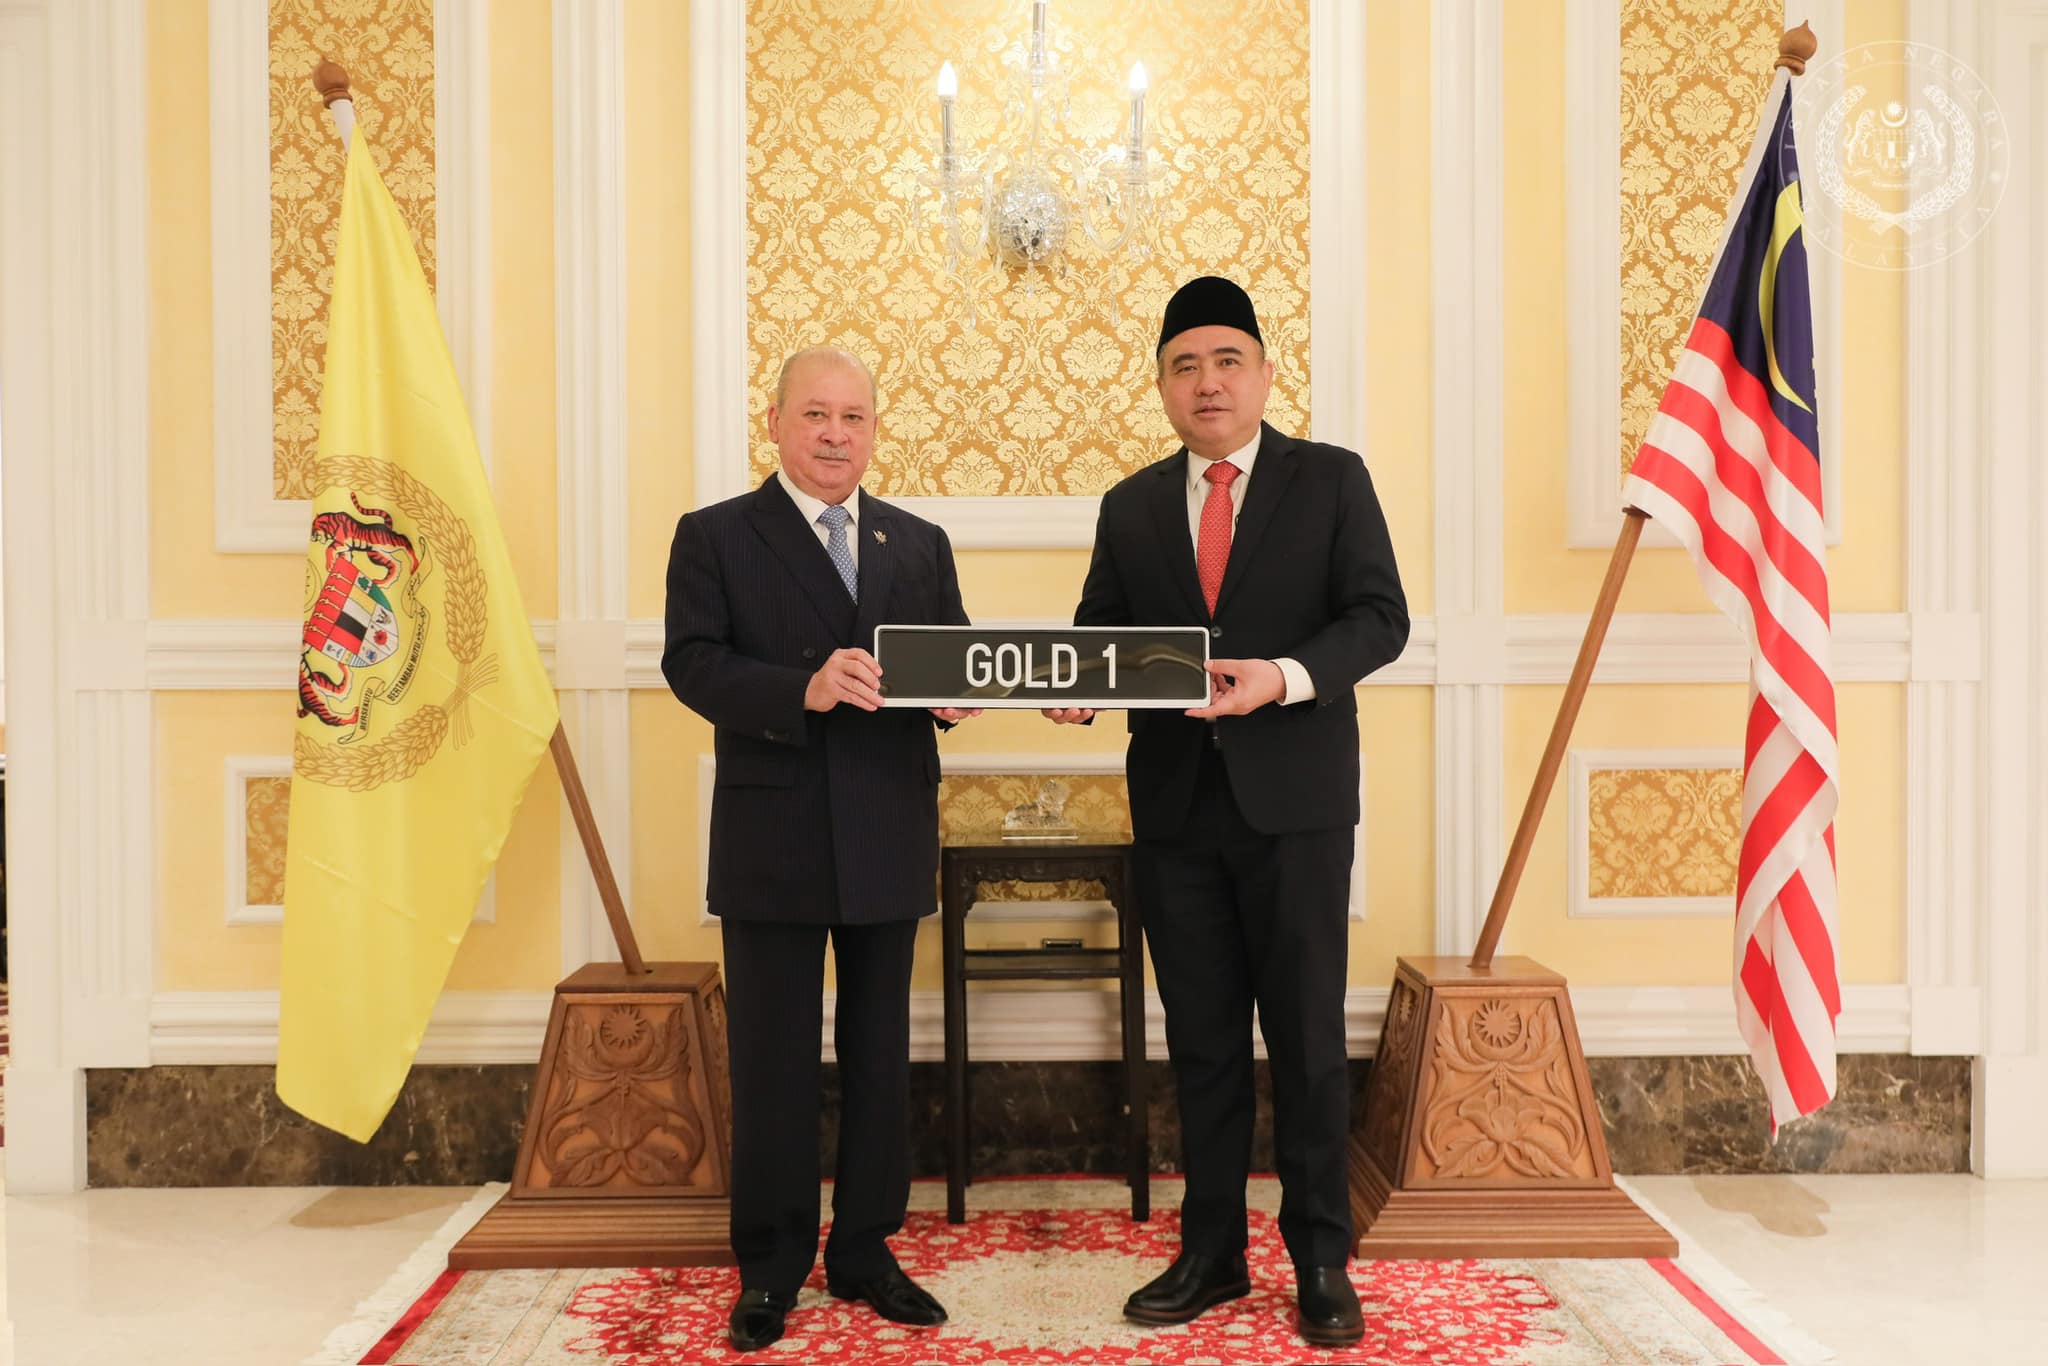 Ydpa buys 'gold 1' license plate